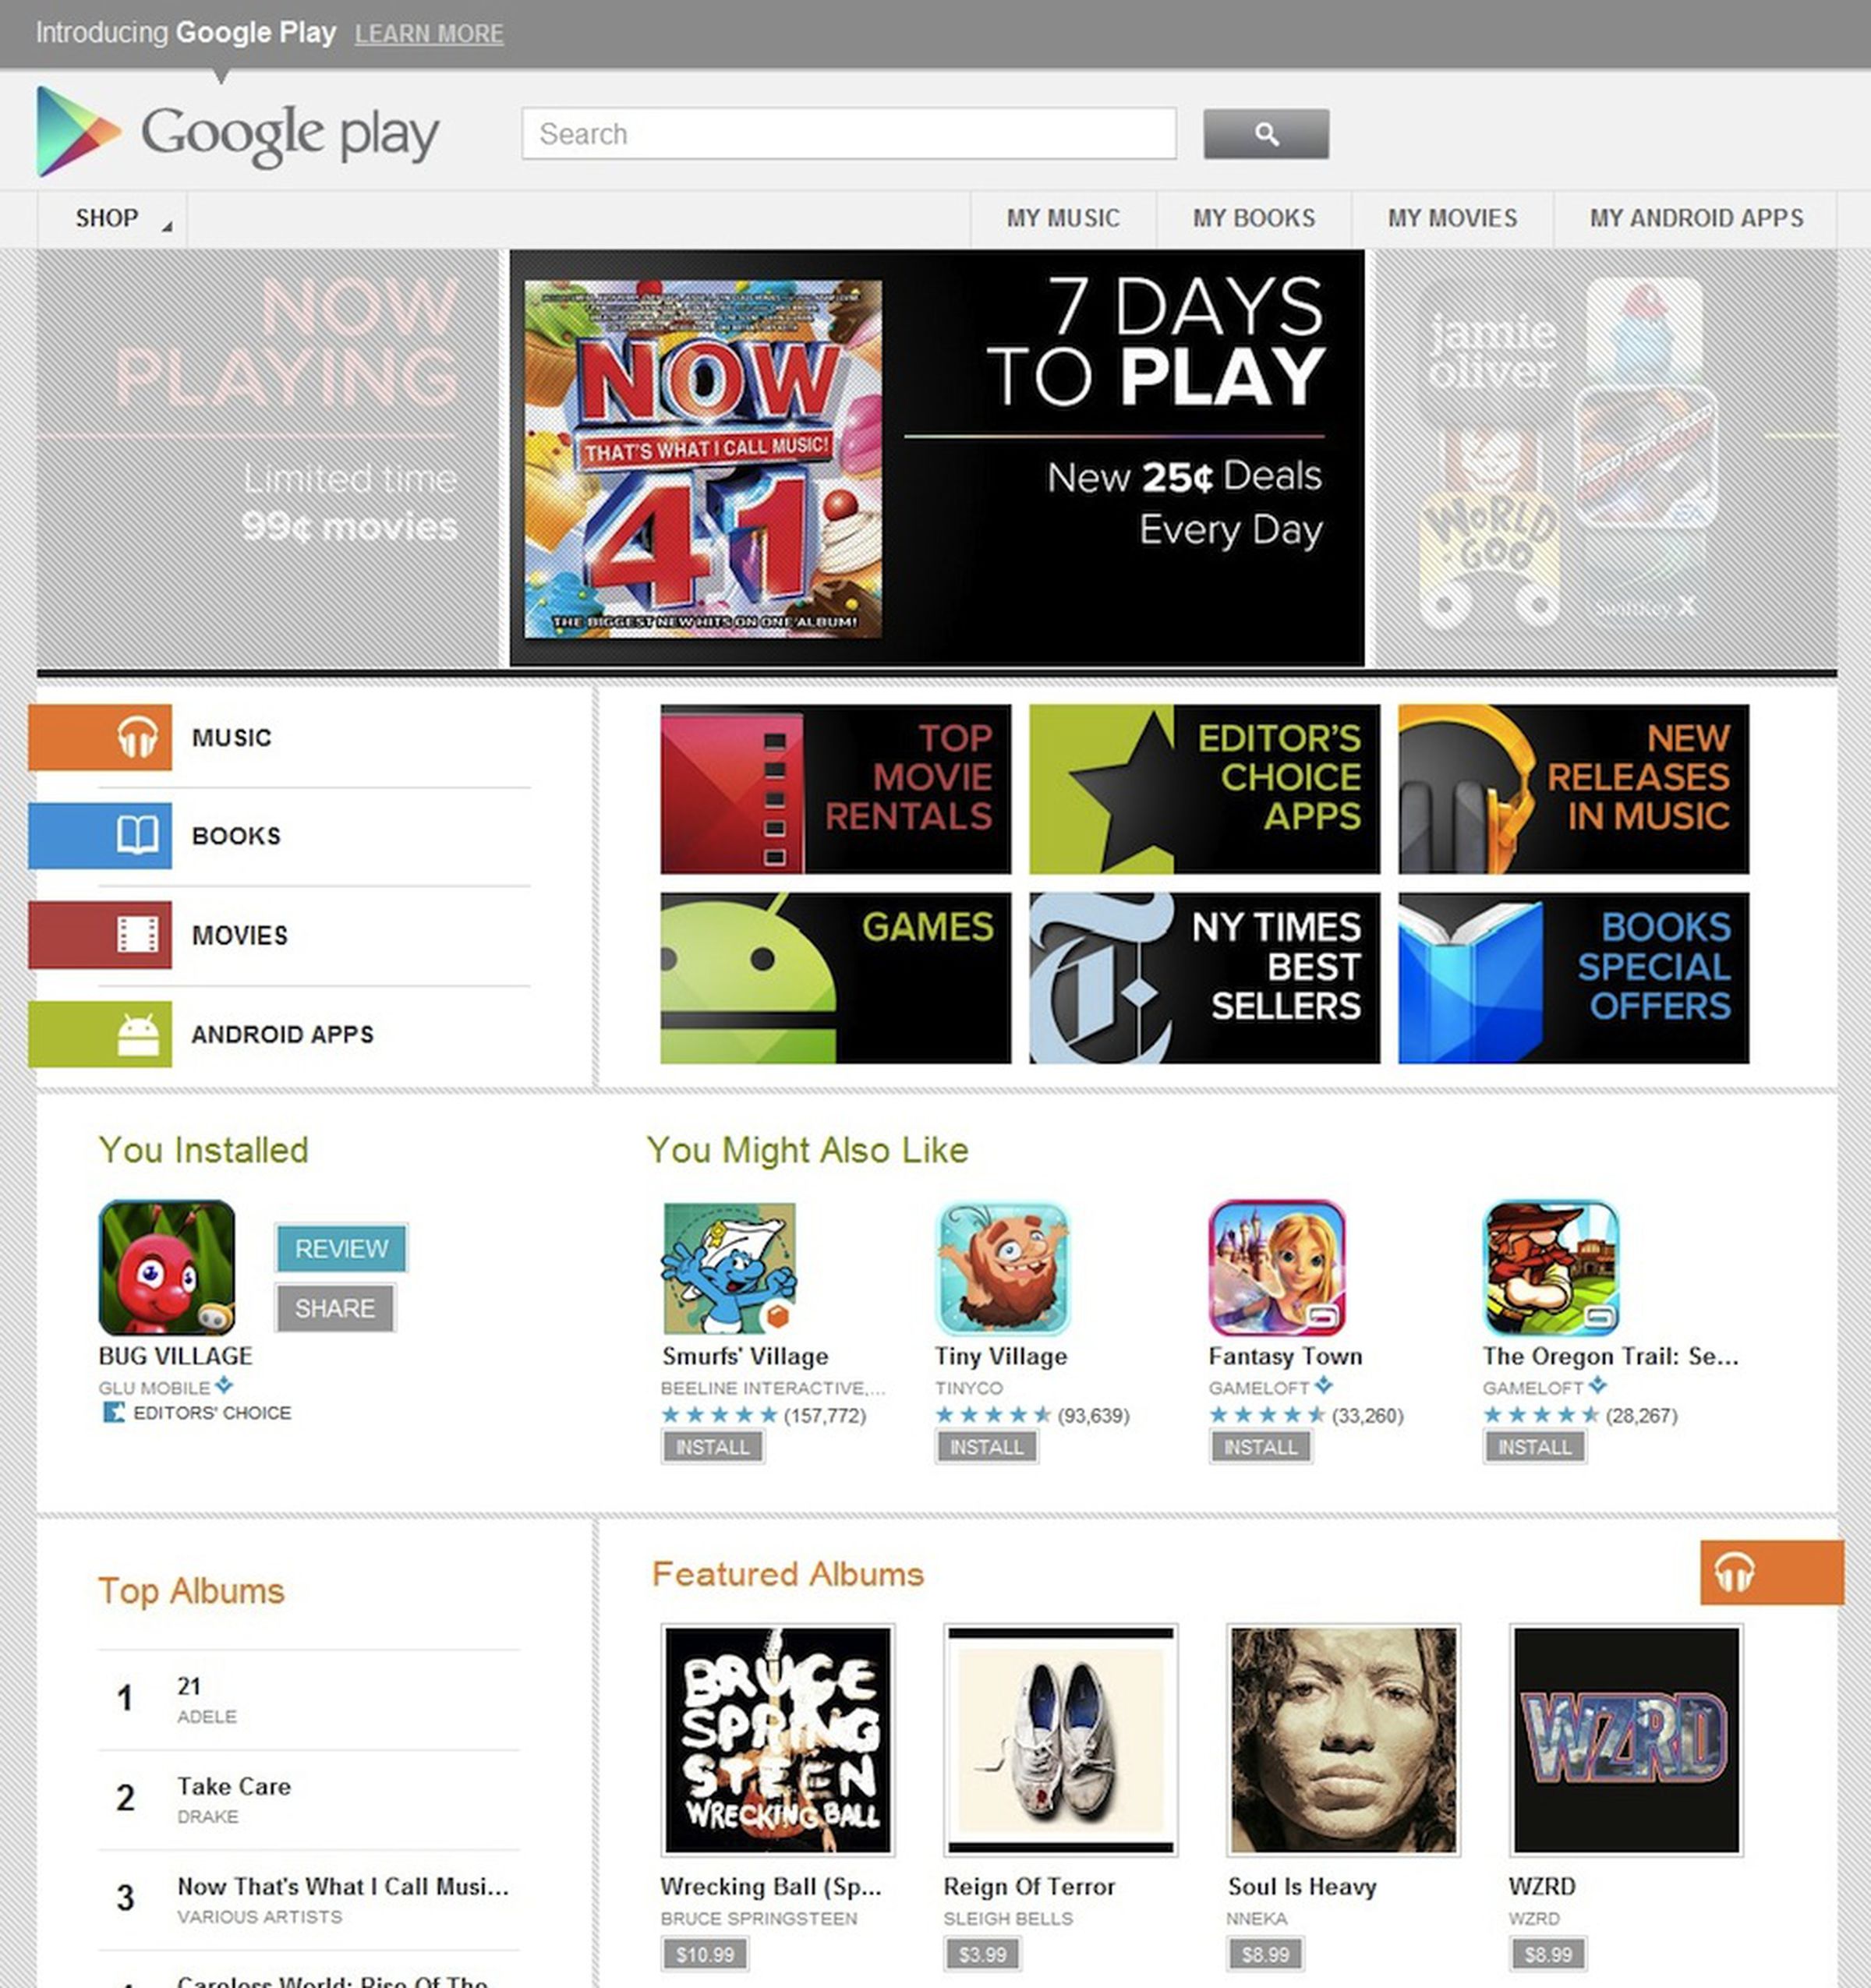 Google Play images